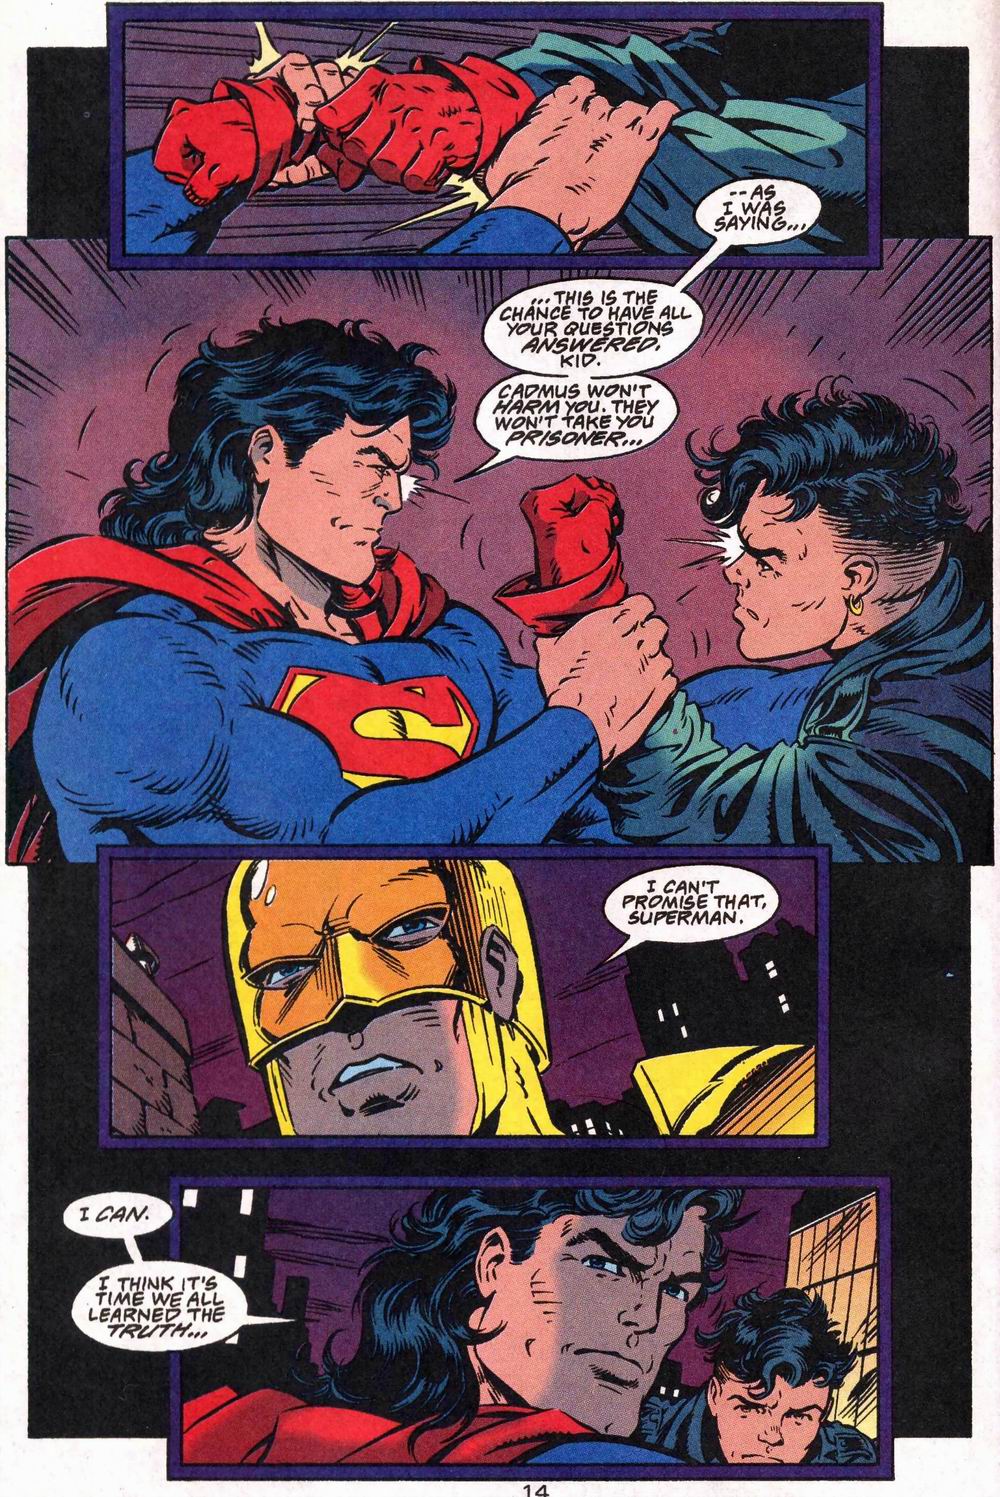 Adventures of Superman (1987) 506 Page 14